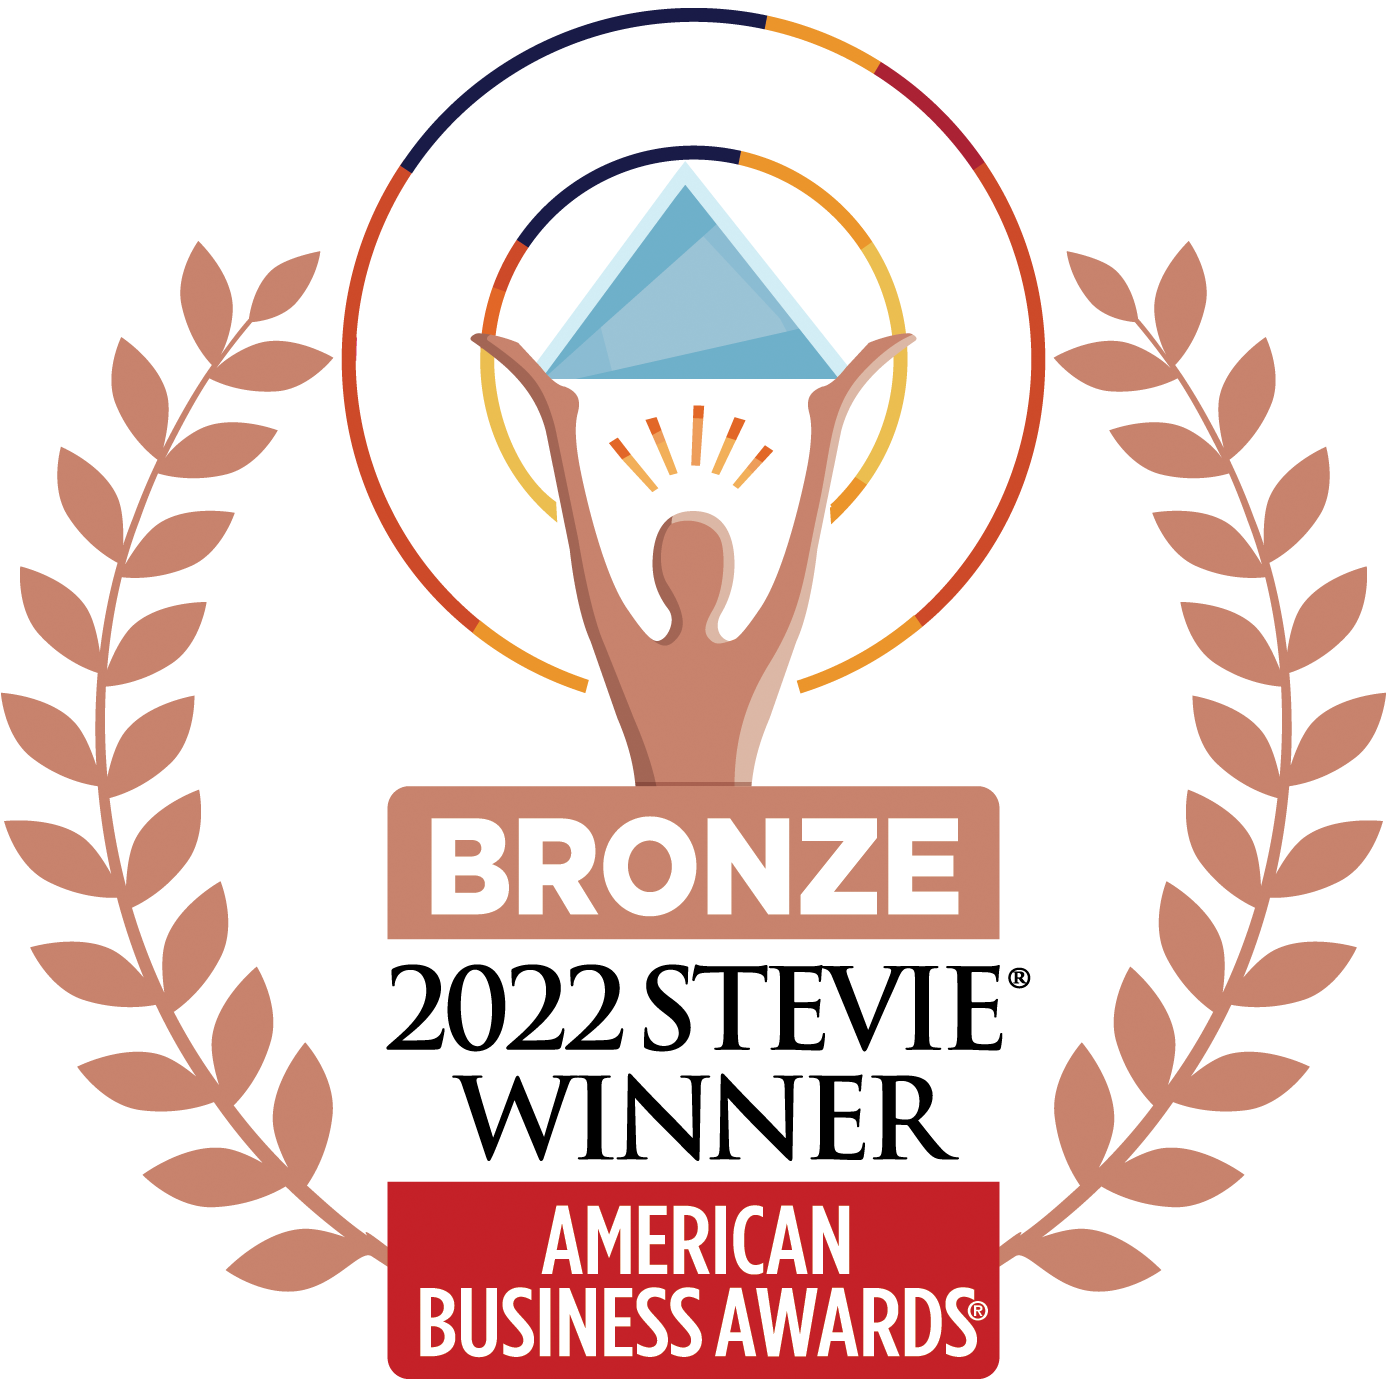 THE AMERICAN BUSINESS AWARDS®